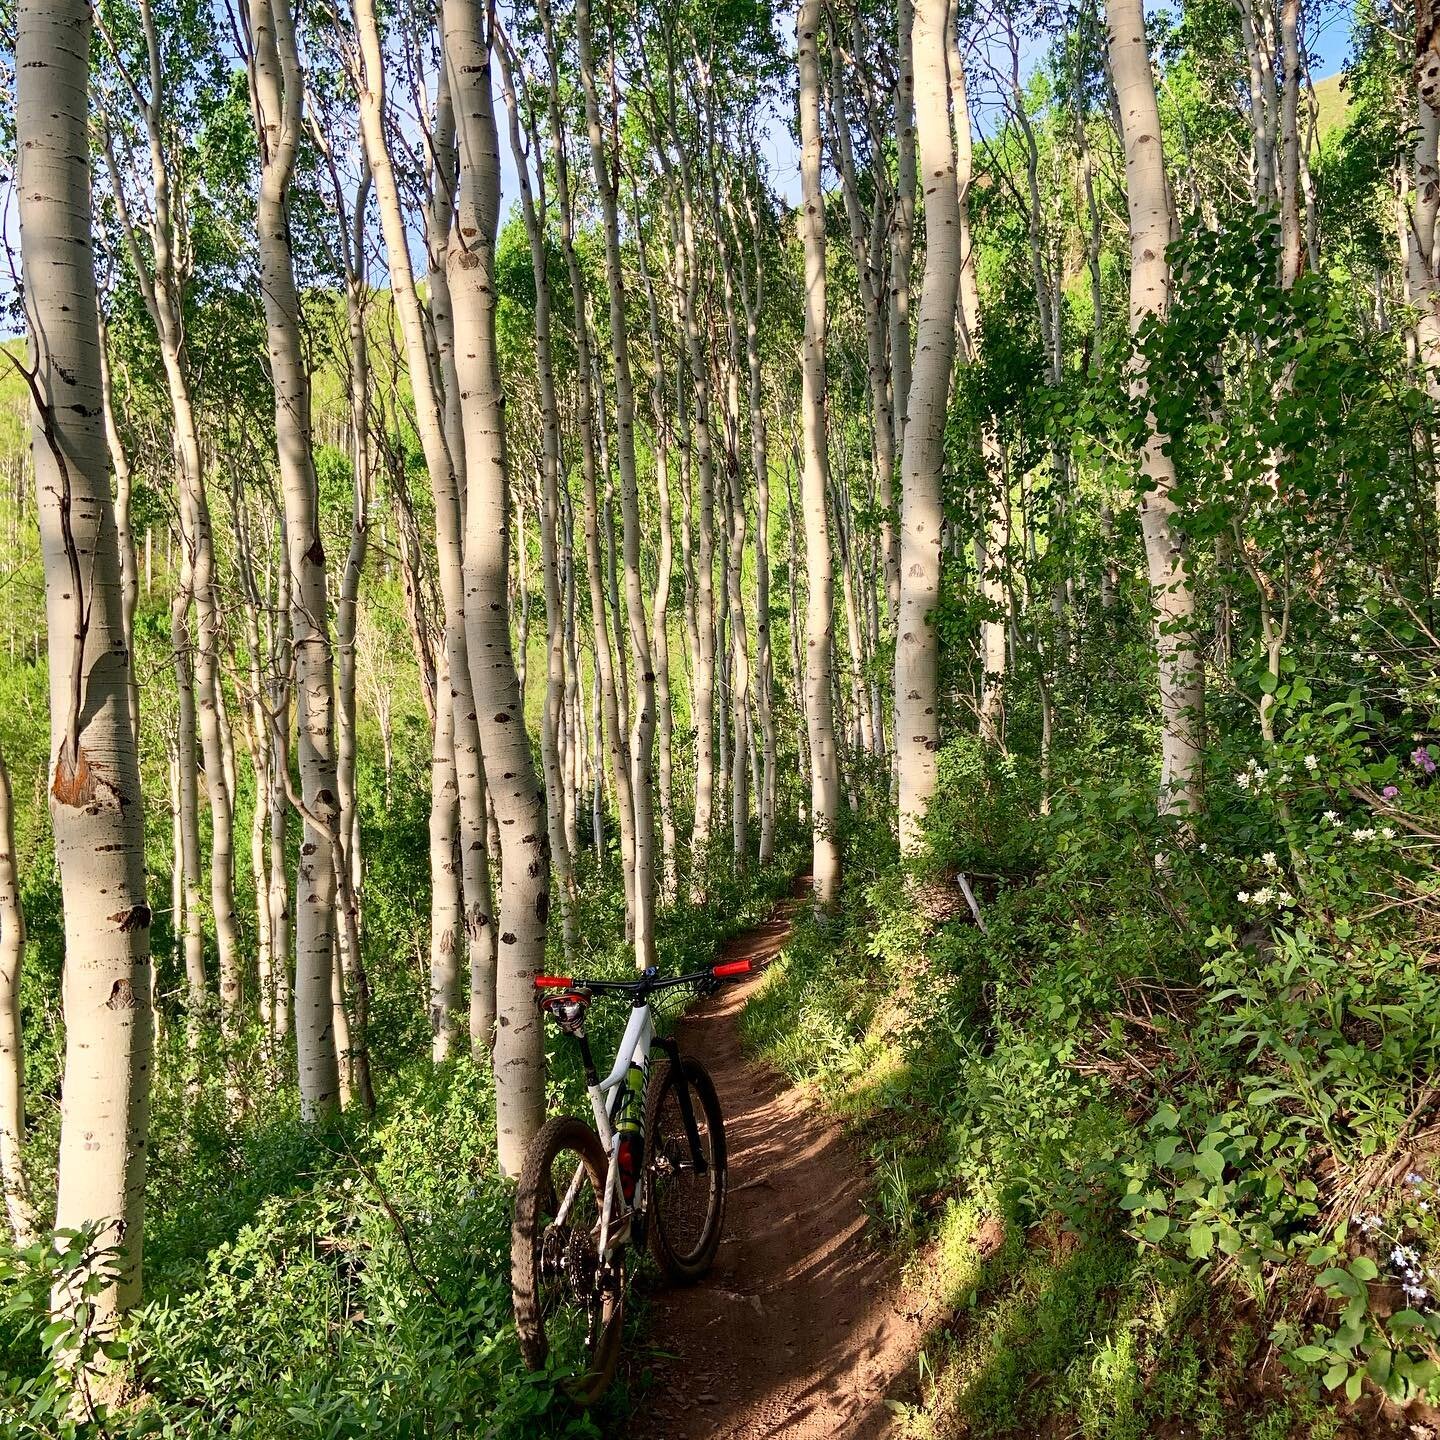 A little #trailtuesday action with a pic from #midmountaintrail in #parkcity last week. Can never get enough of those #aspentrees .
.
.
.

#getoutside #lovetheoutdoors #explorenewplaces #offthegrid #makeyourownparadise #trailsick #findadventure #utah